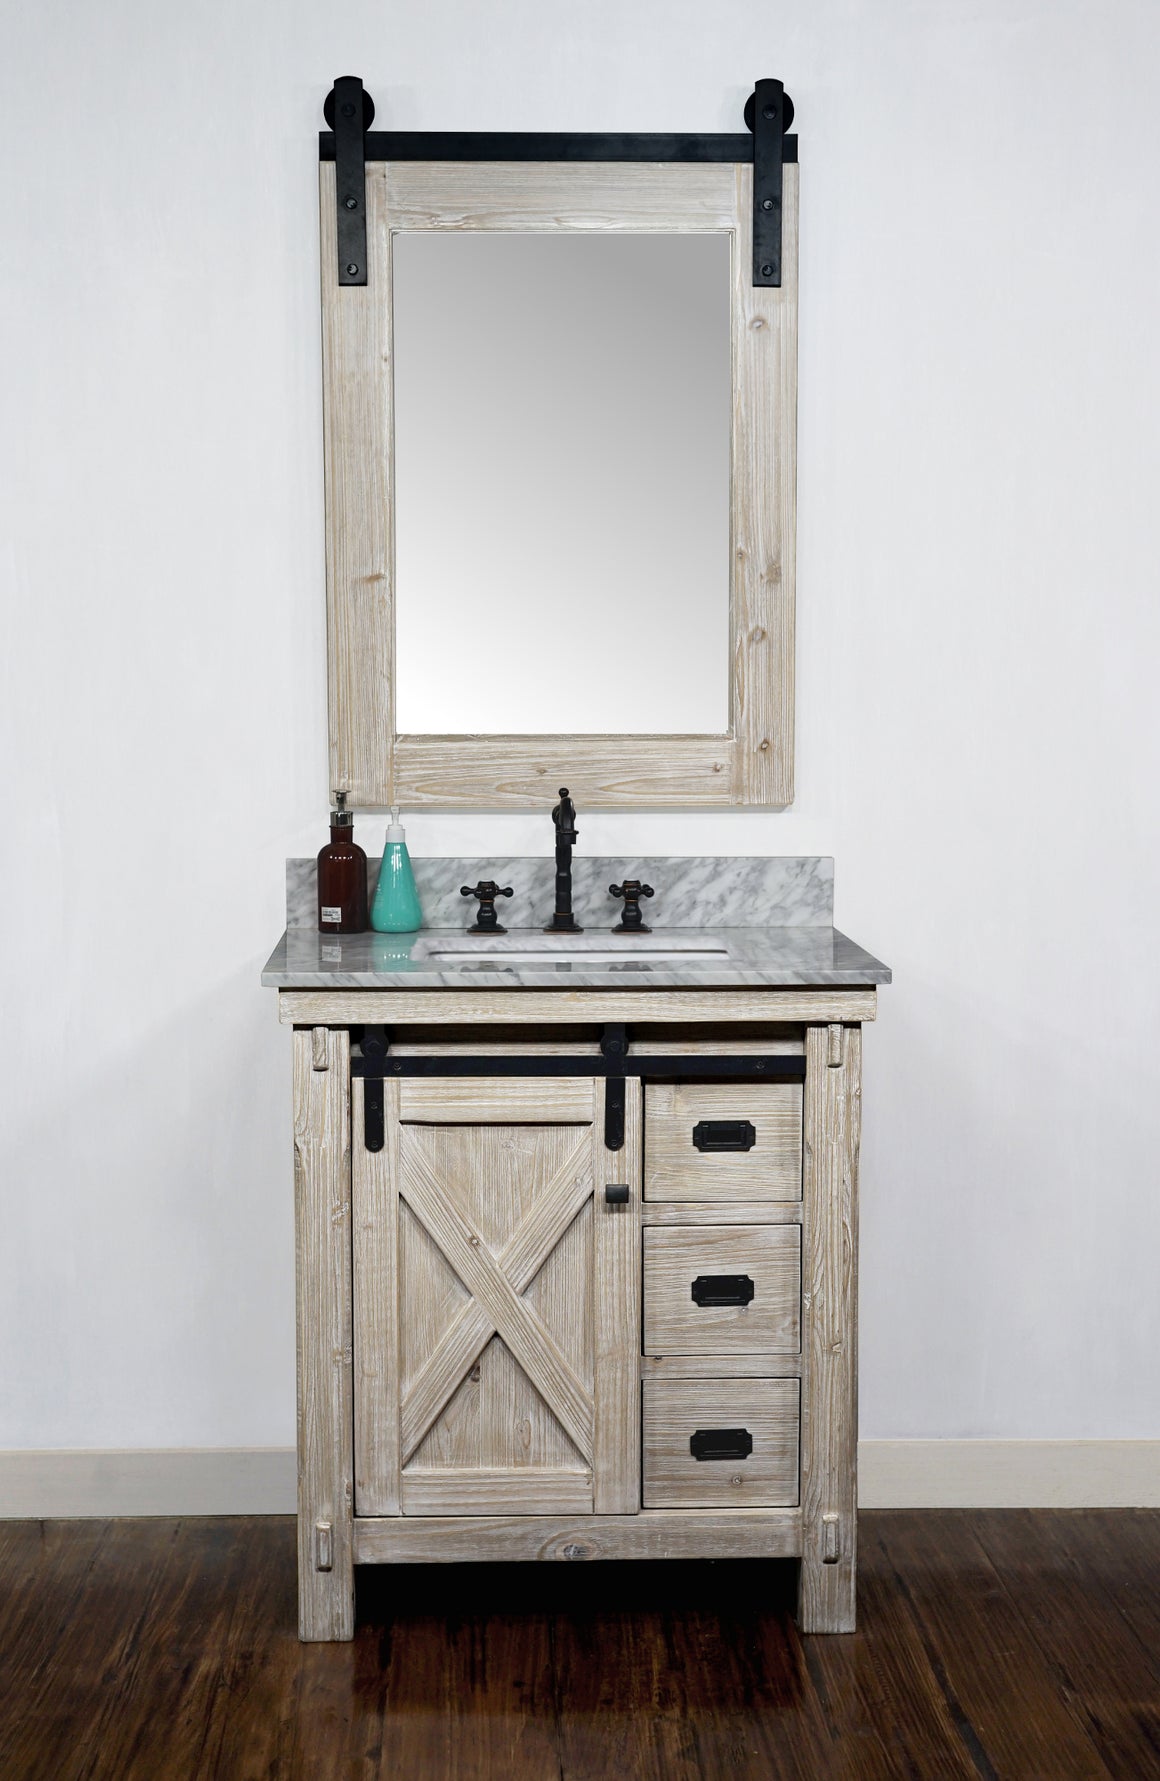 30"RUSTIC SOLID FIR BARN DOOR STYLE SINGLE SINK VANITY WITH CARRARA WHITE MARBLE TOP WITH RECTANGULAR SINK-NO FAUCET